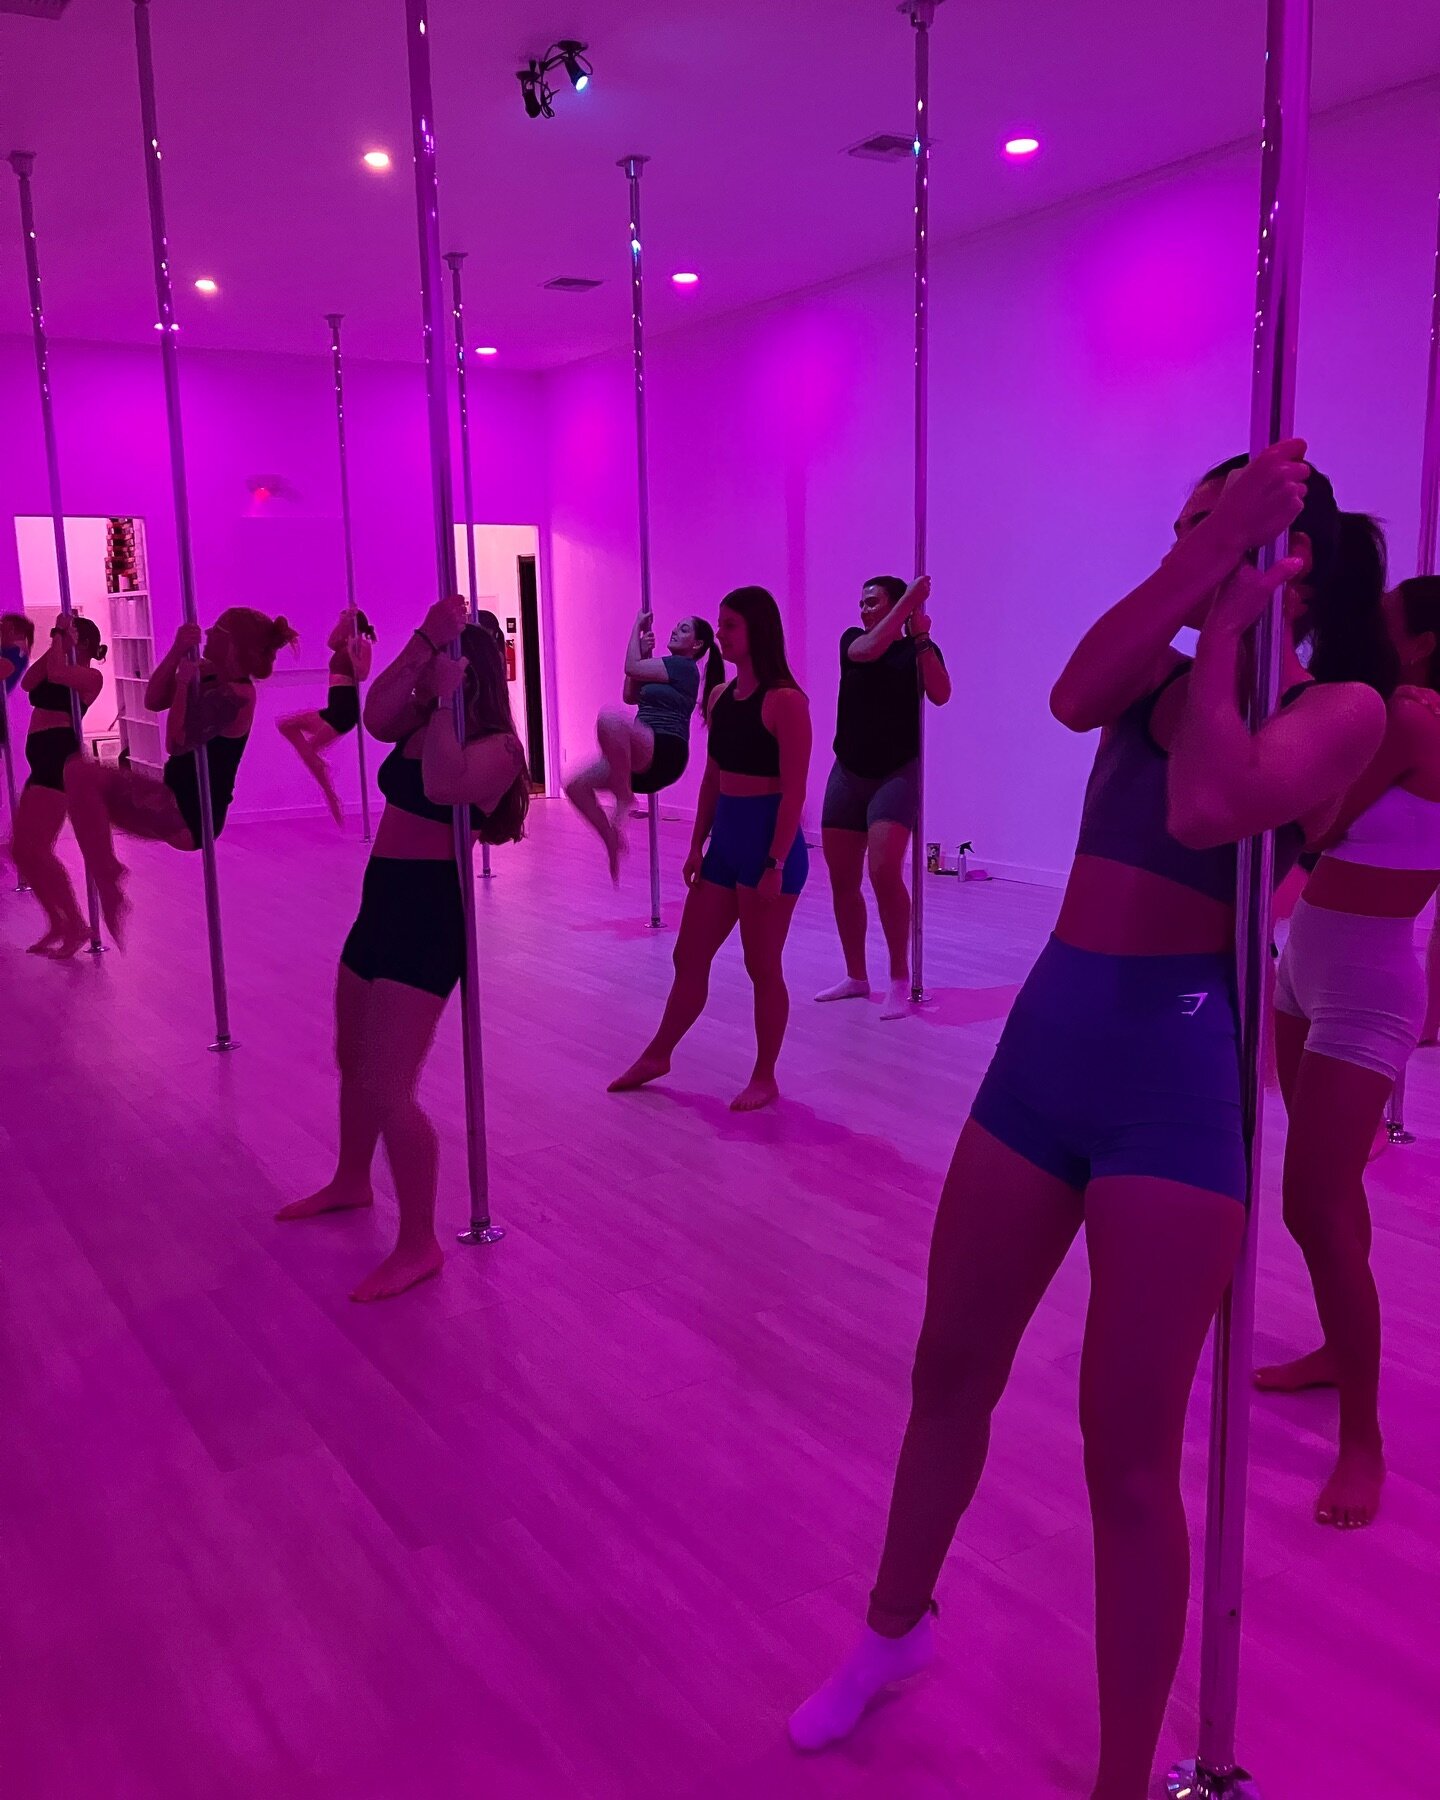 Sneak Peek into our beautiful studio 😍

All bodies. All genders. All levels. 18+

All levels welcome, from total beginners to advanced students, with classes in Pole Fundamentals/Tricks, Dance/Choreography, Fitness, Flexibility and more! 

#poledanc